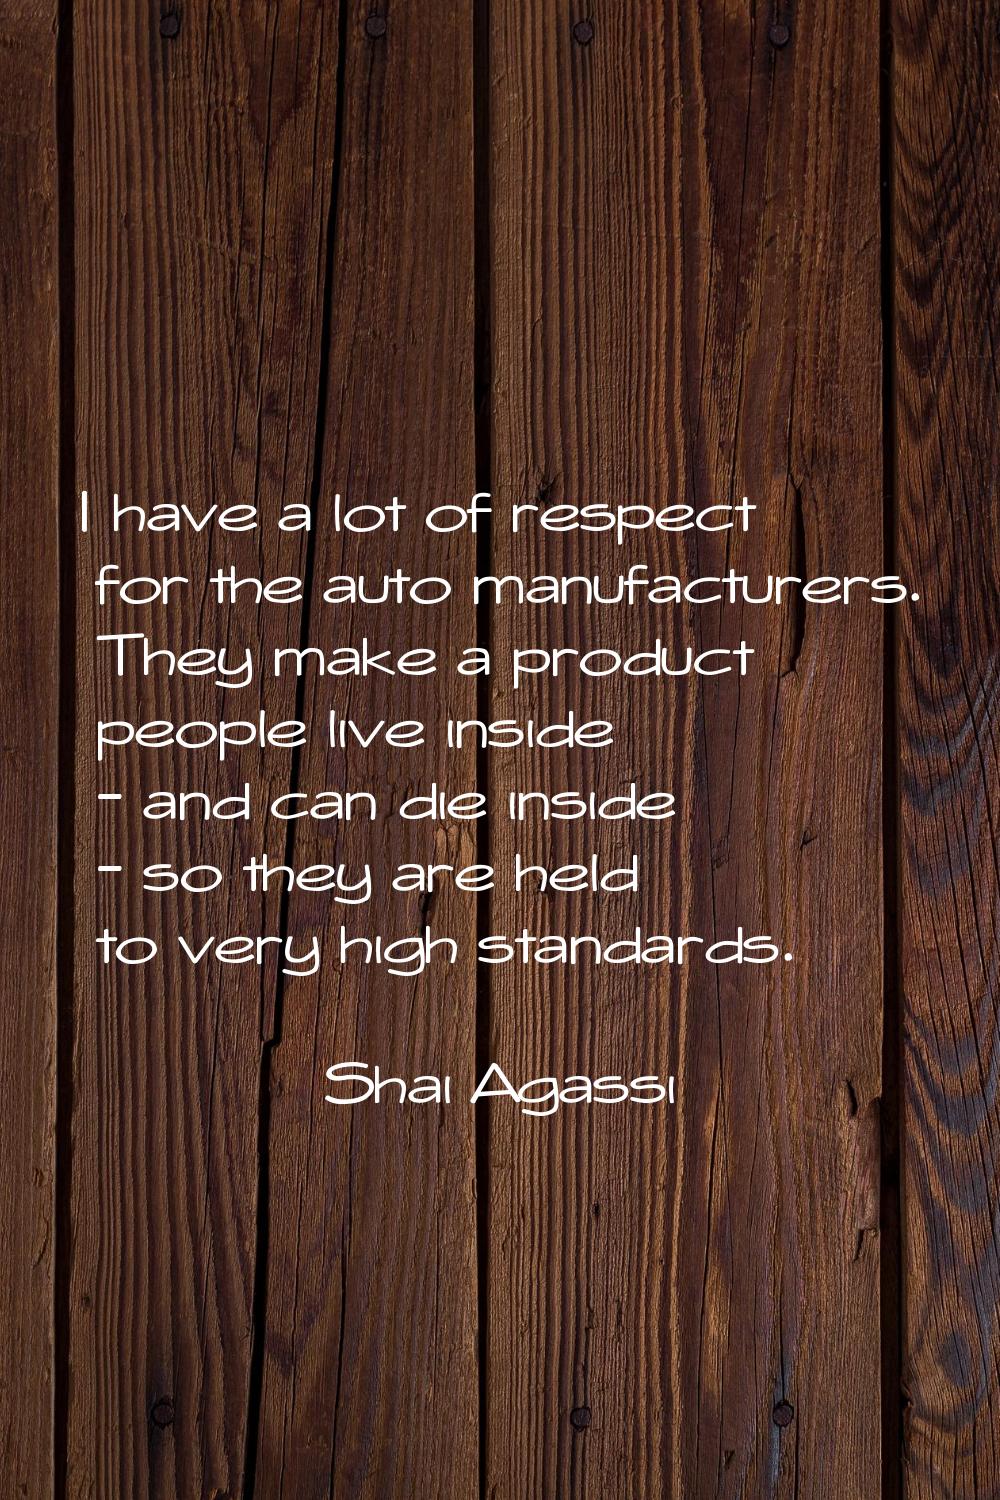 I have a lot of respect for the auto manufacturers. They make a product people live inside - and ca